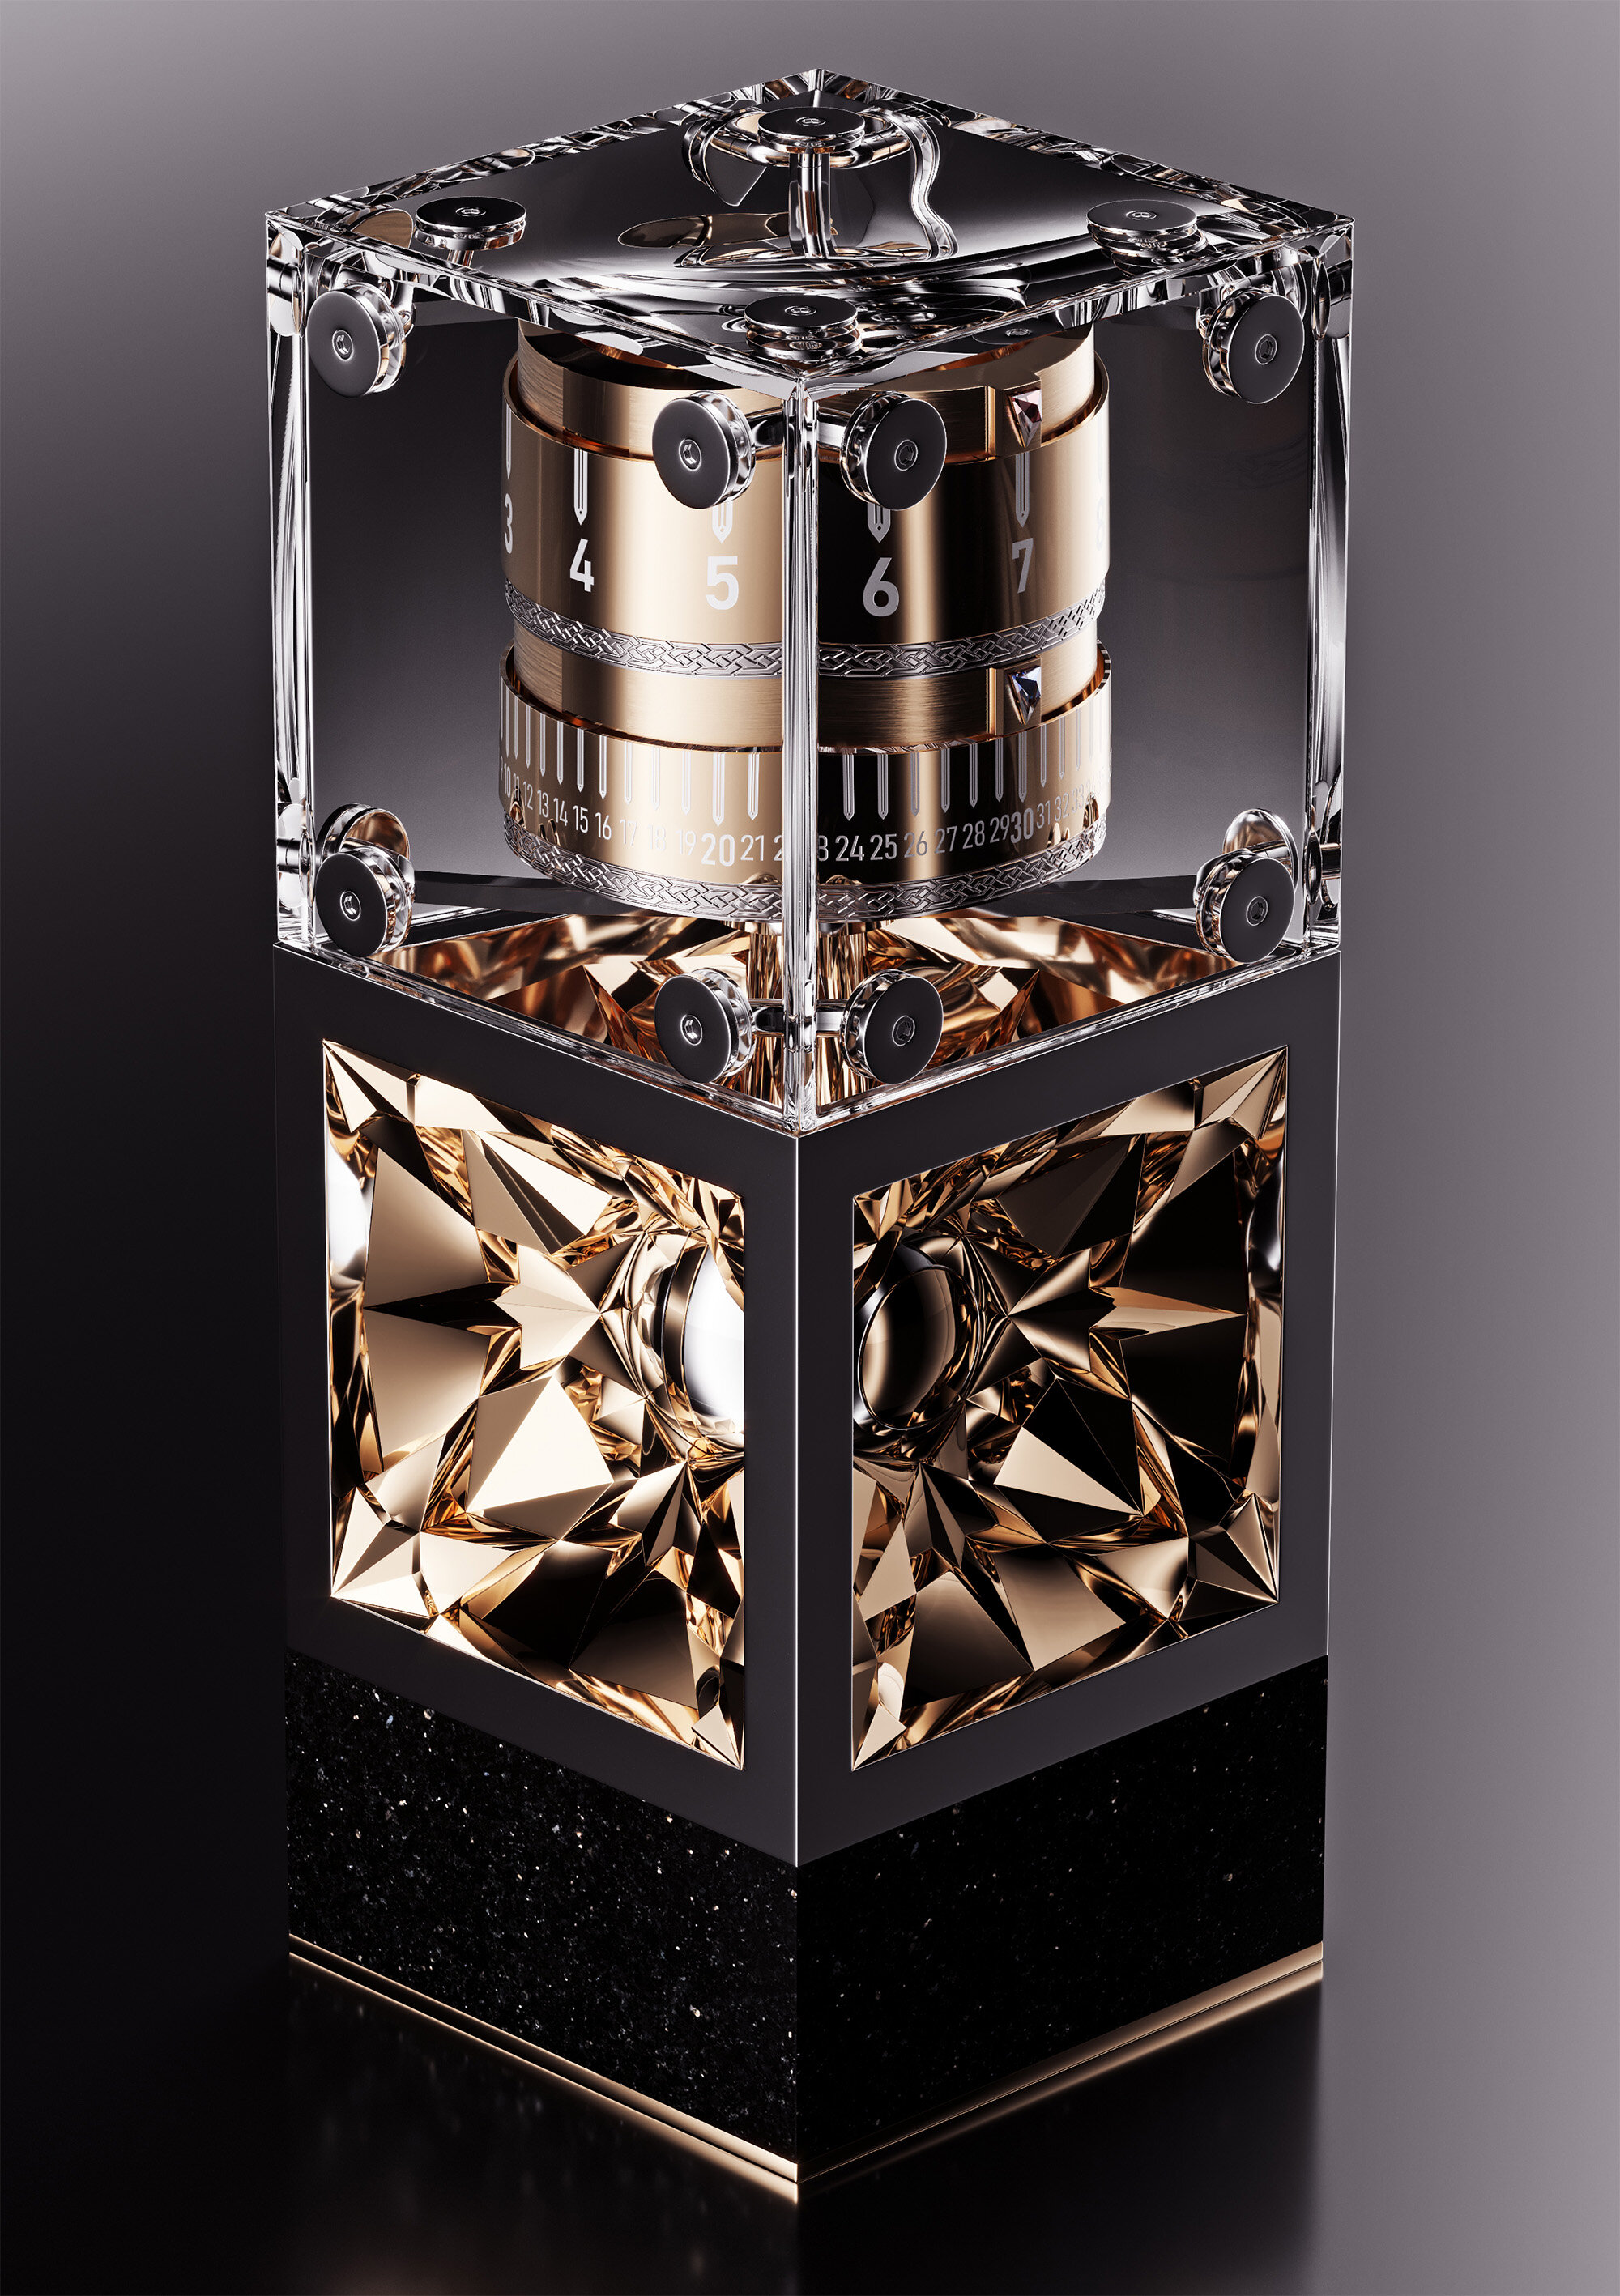 Luxury table clocks for Royal Insignia — luxury and high-end design